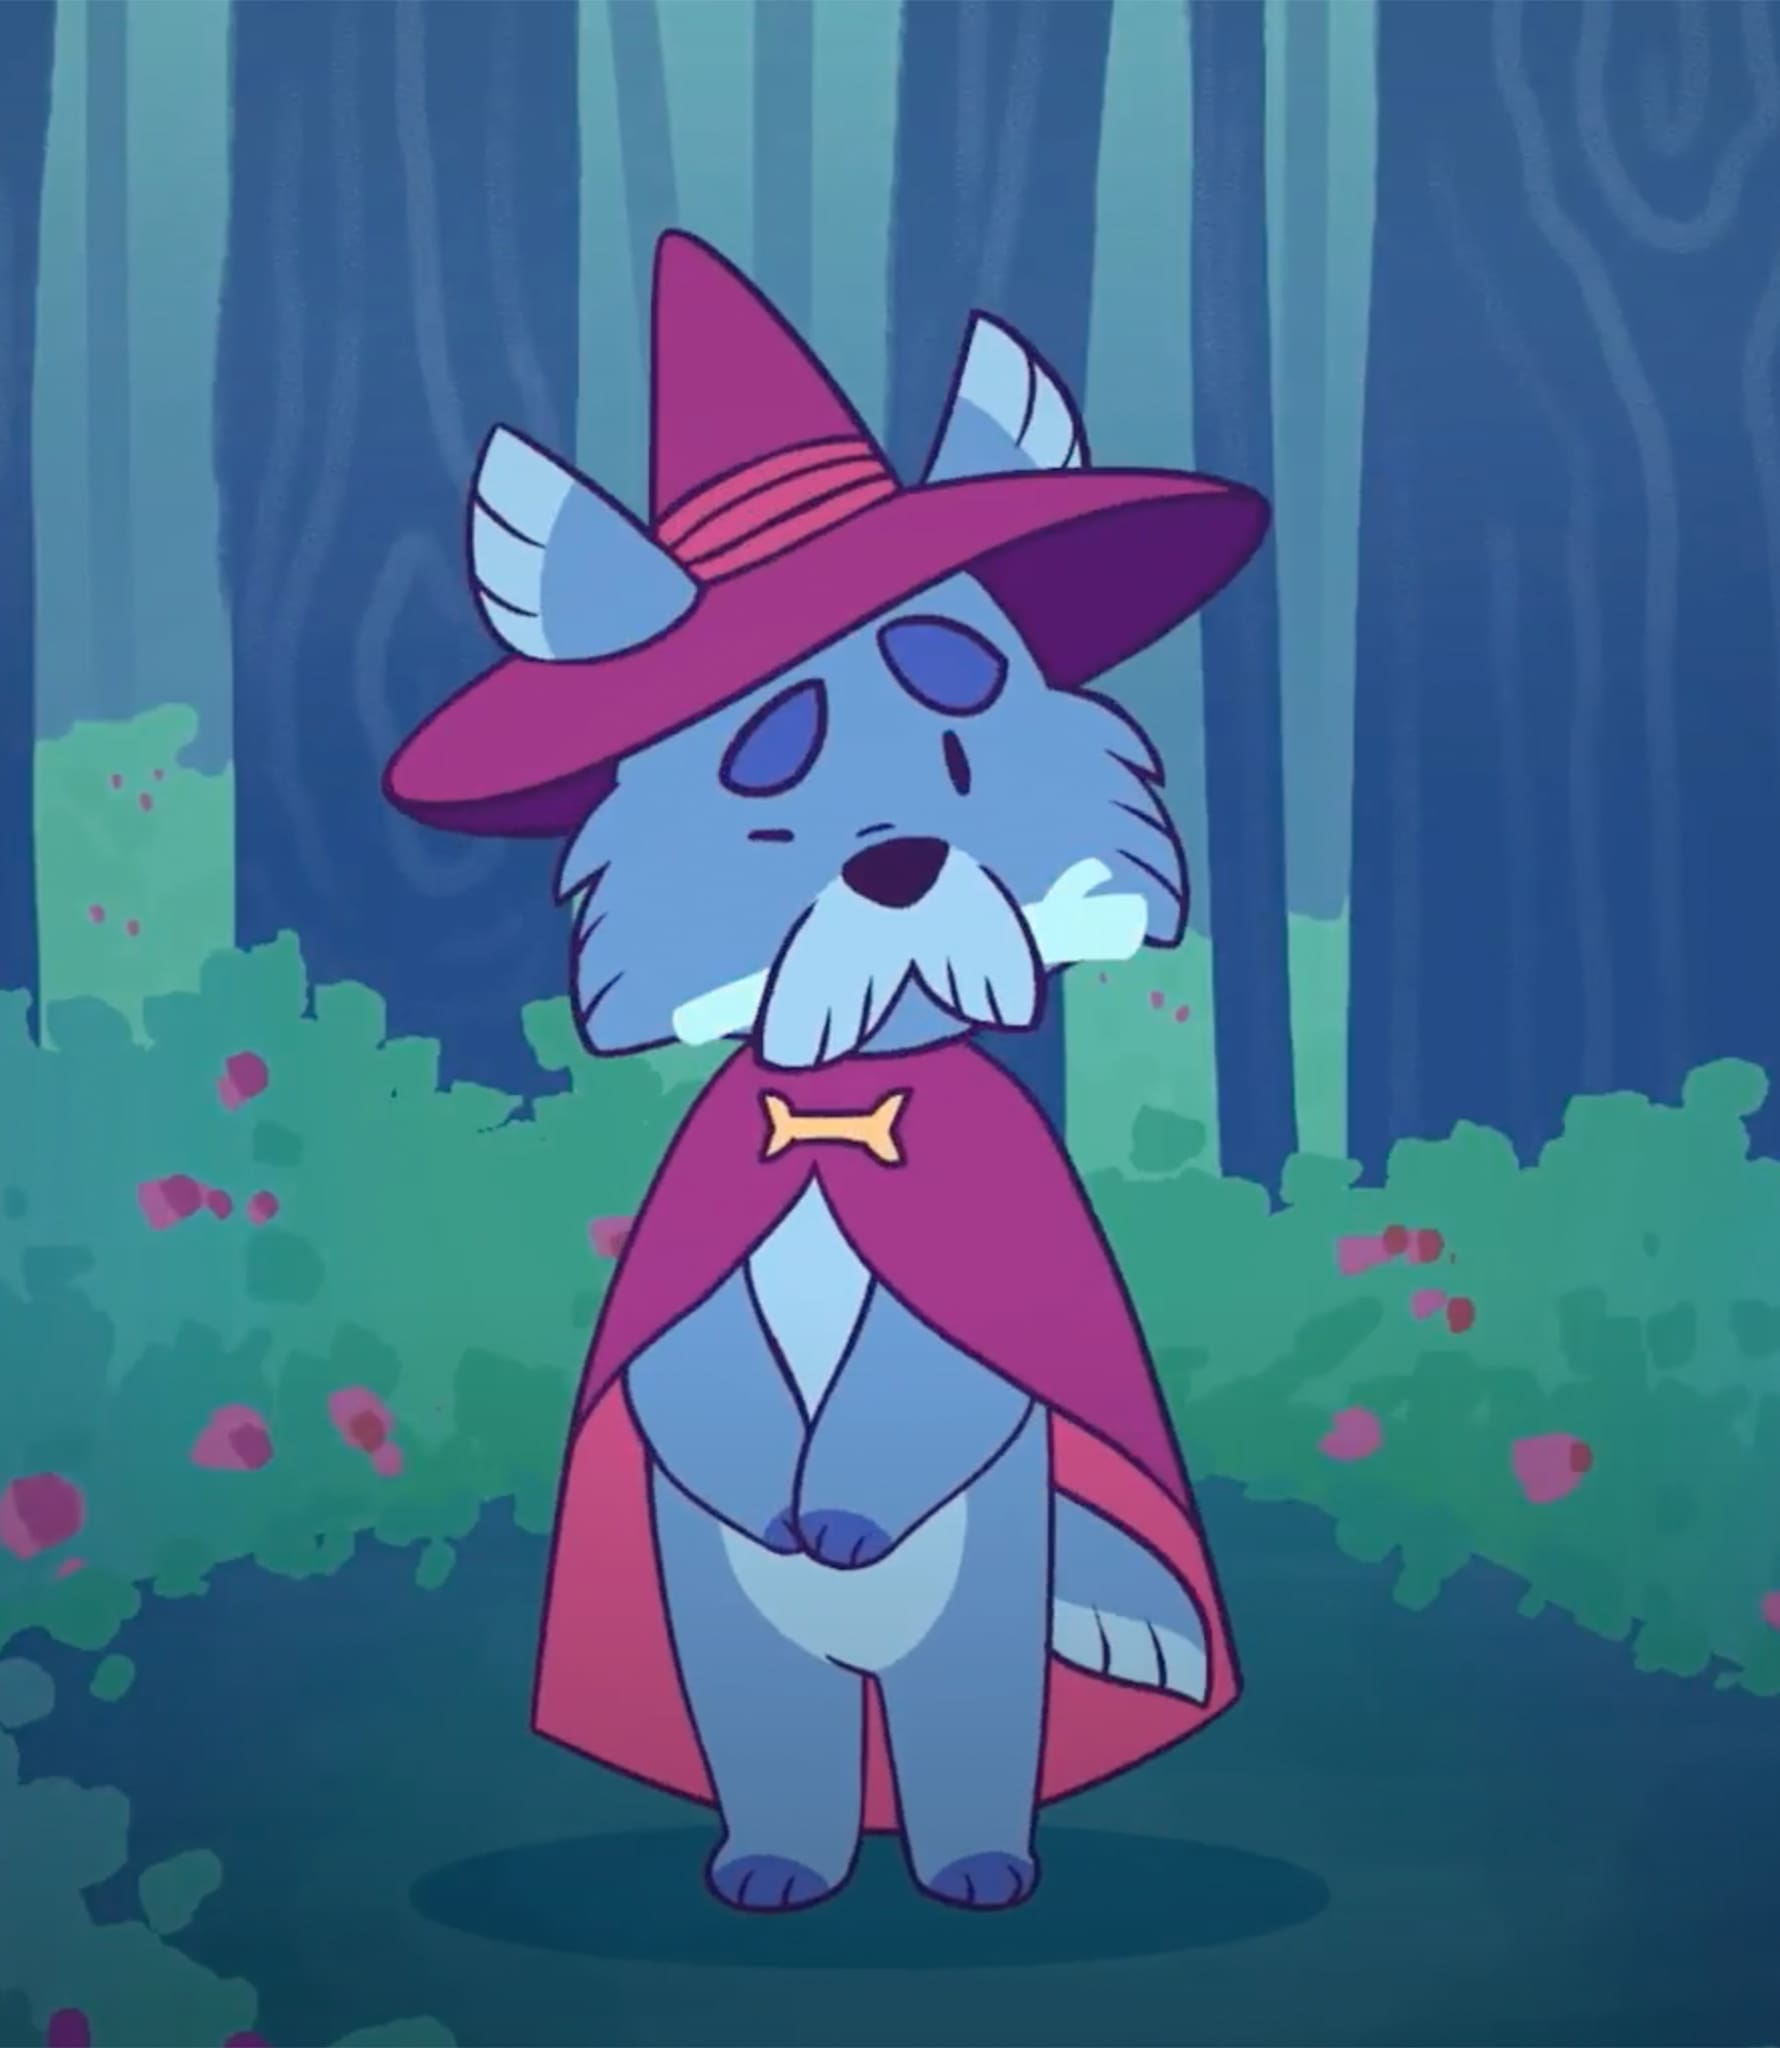 Illustration of a fictional animal wizard in a forest 